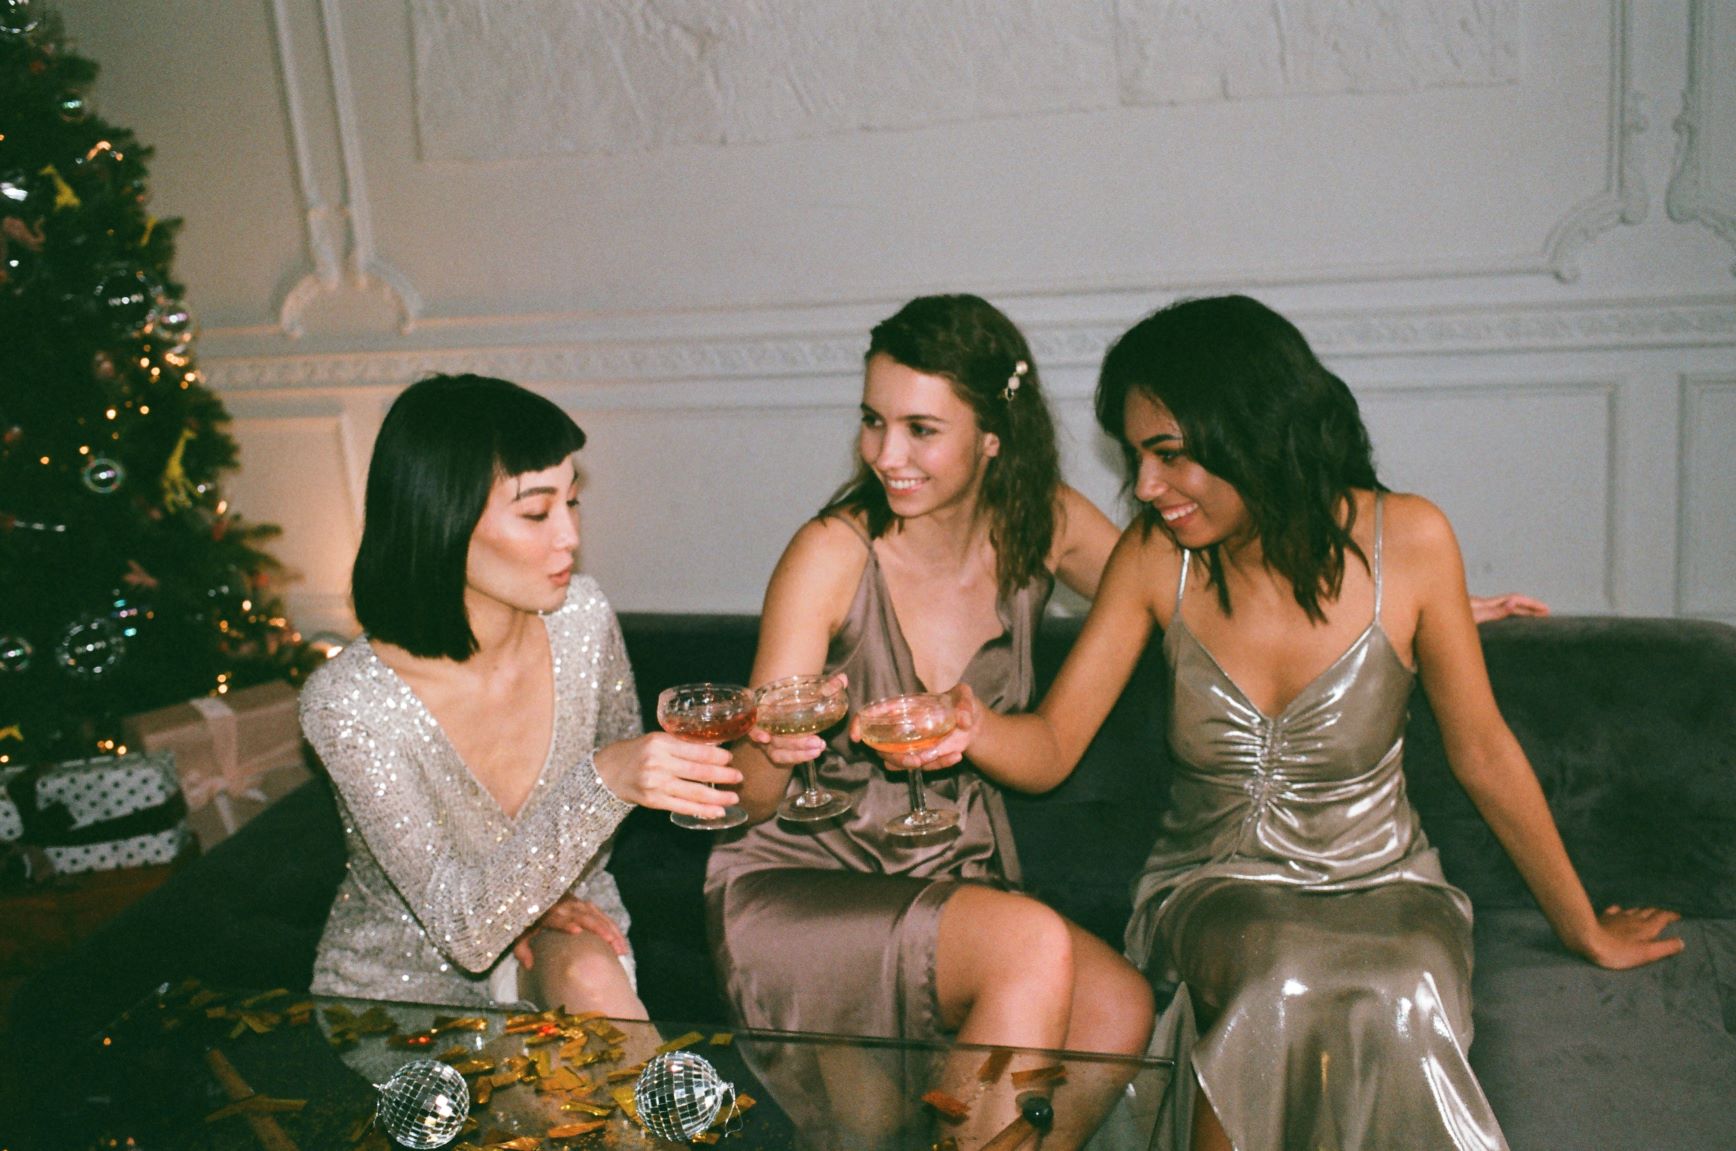 Three women in cocktail dresses